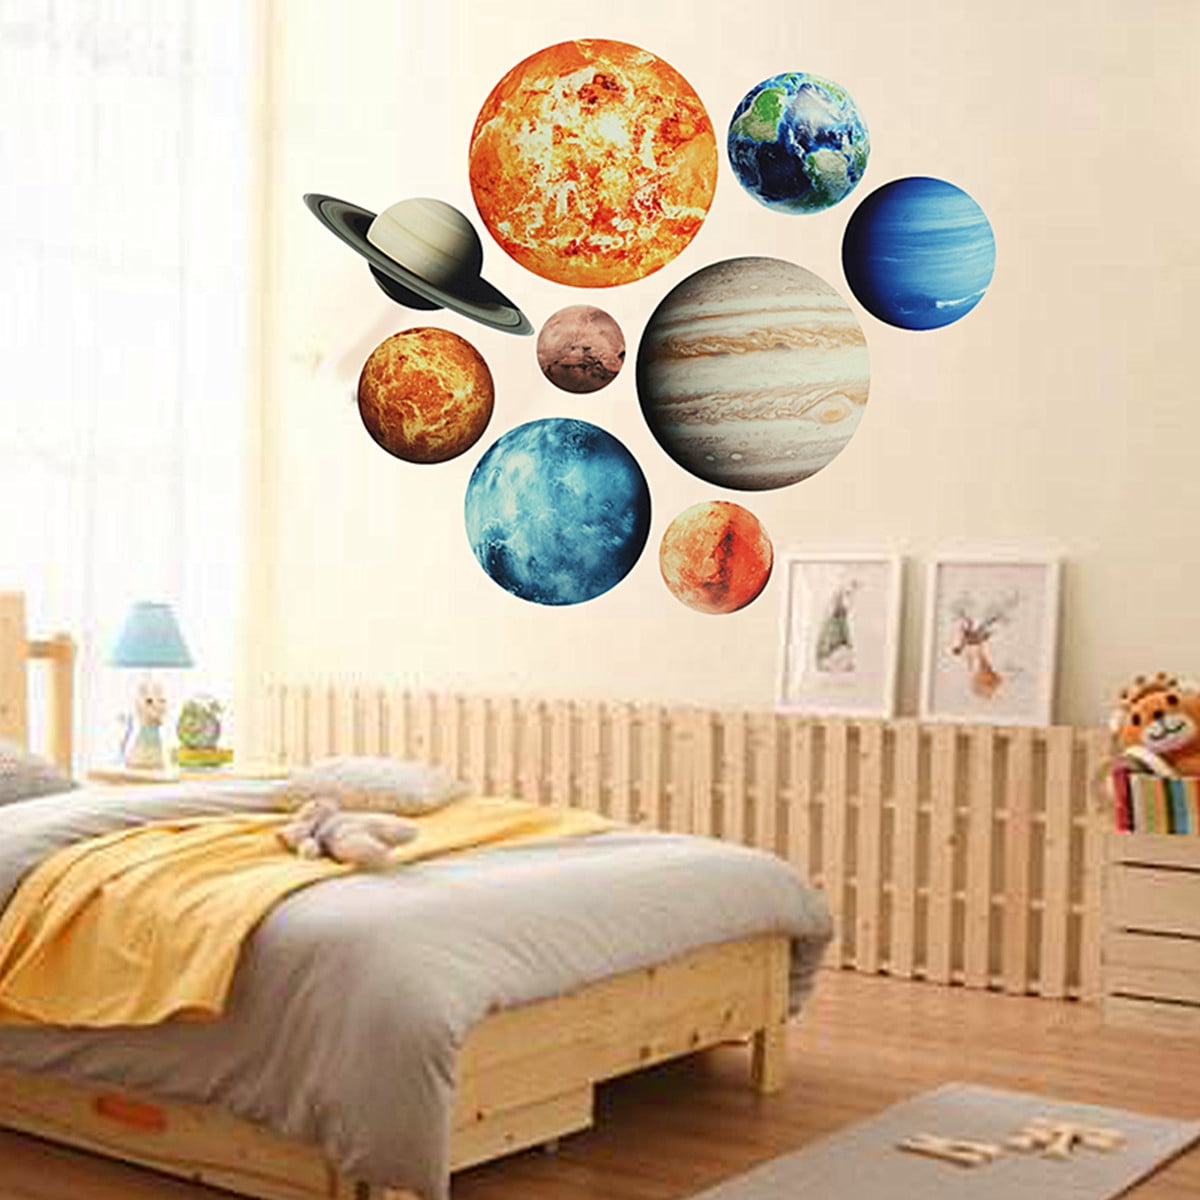 Luminous Planets PVC Wall Stickers Glow In Dark 5/6/9 Planets Bedroom ... - A712fcca B9De 433f 8ec1 5701264e29D1 1.D06048b80b81c1Db23eD41a461D6f01c